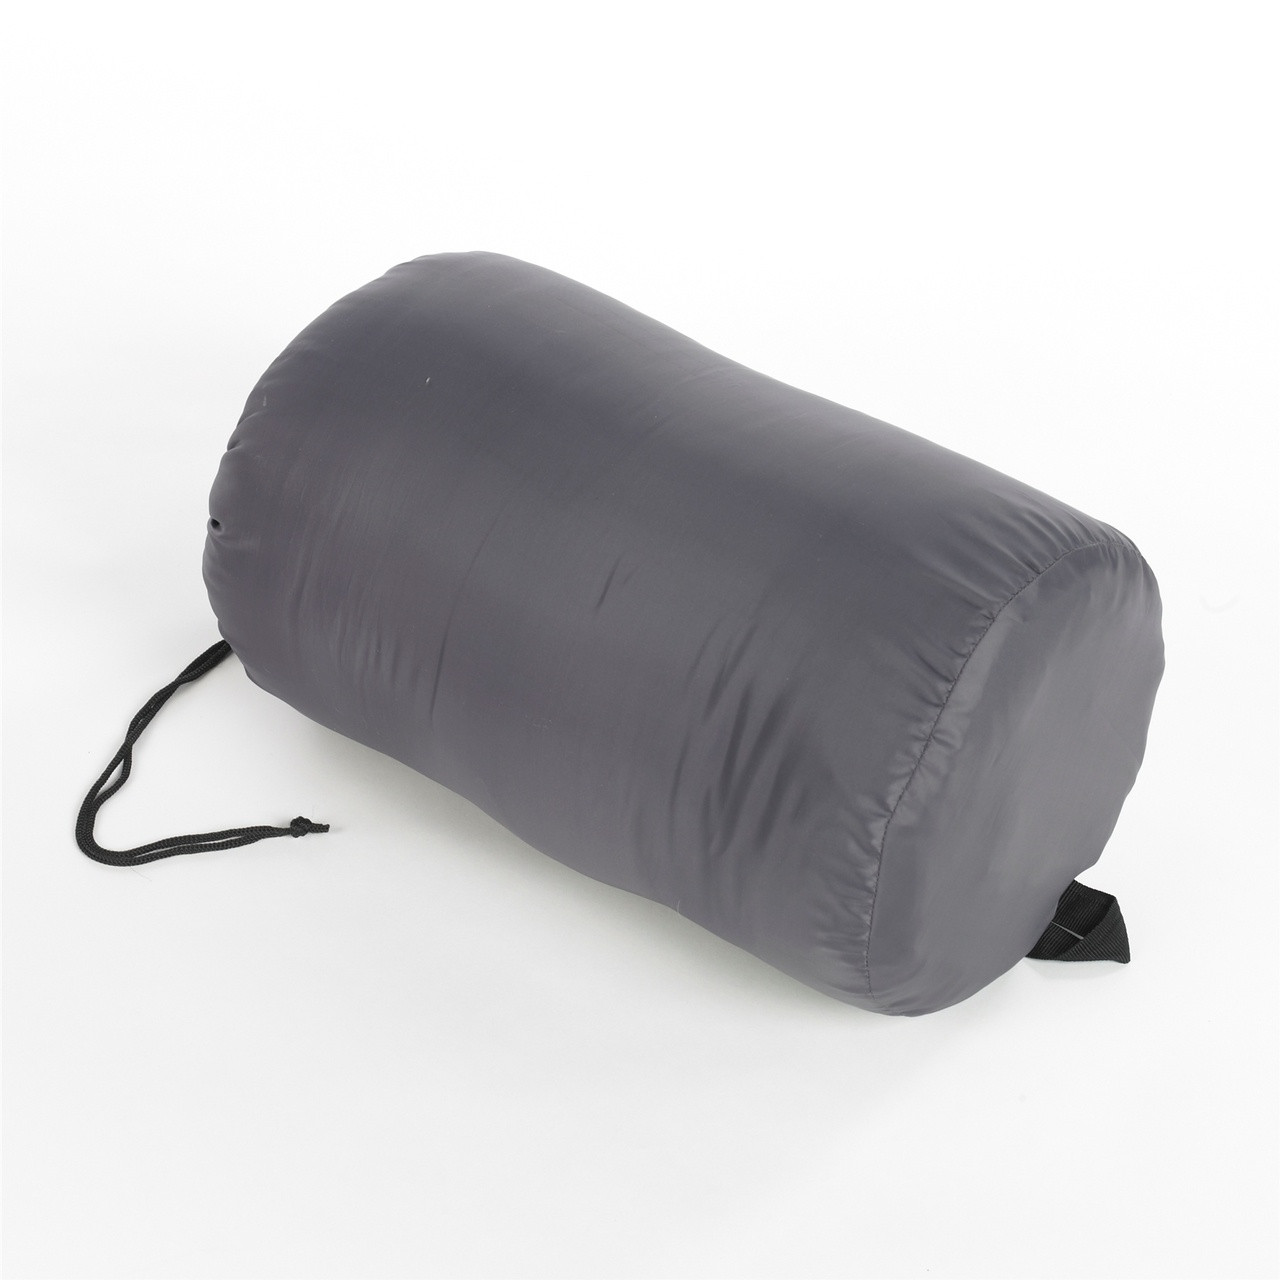 Wenzel Santa Fe Mummy 20 degree sleeping bag rolled up and stored in the gray storage bag